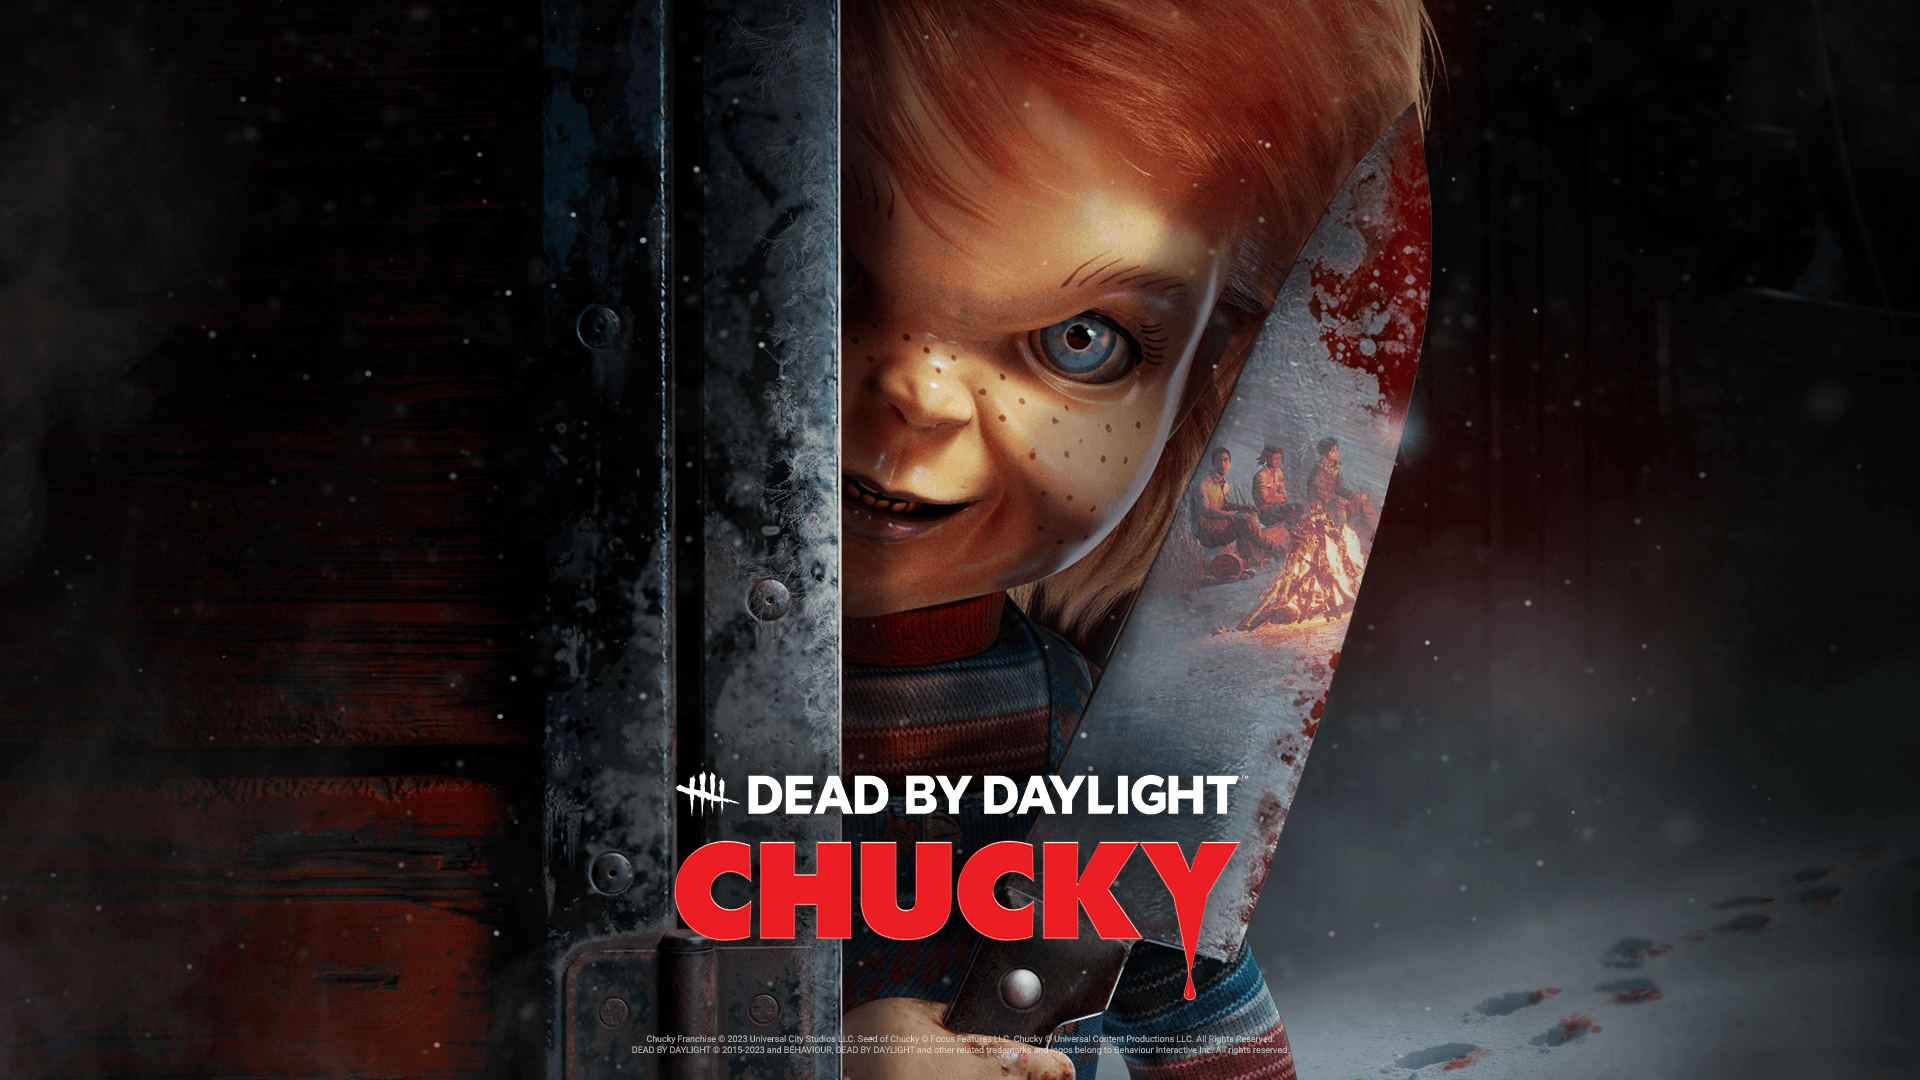 Dead by Daylight Introduces A Third-Person Camera for Chucky